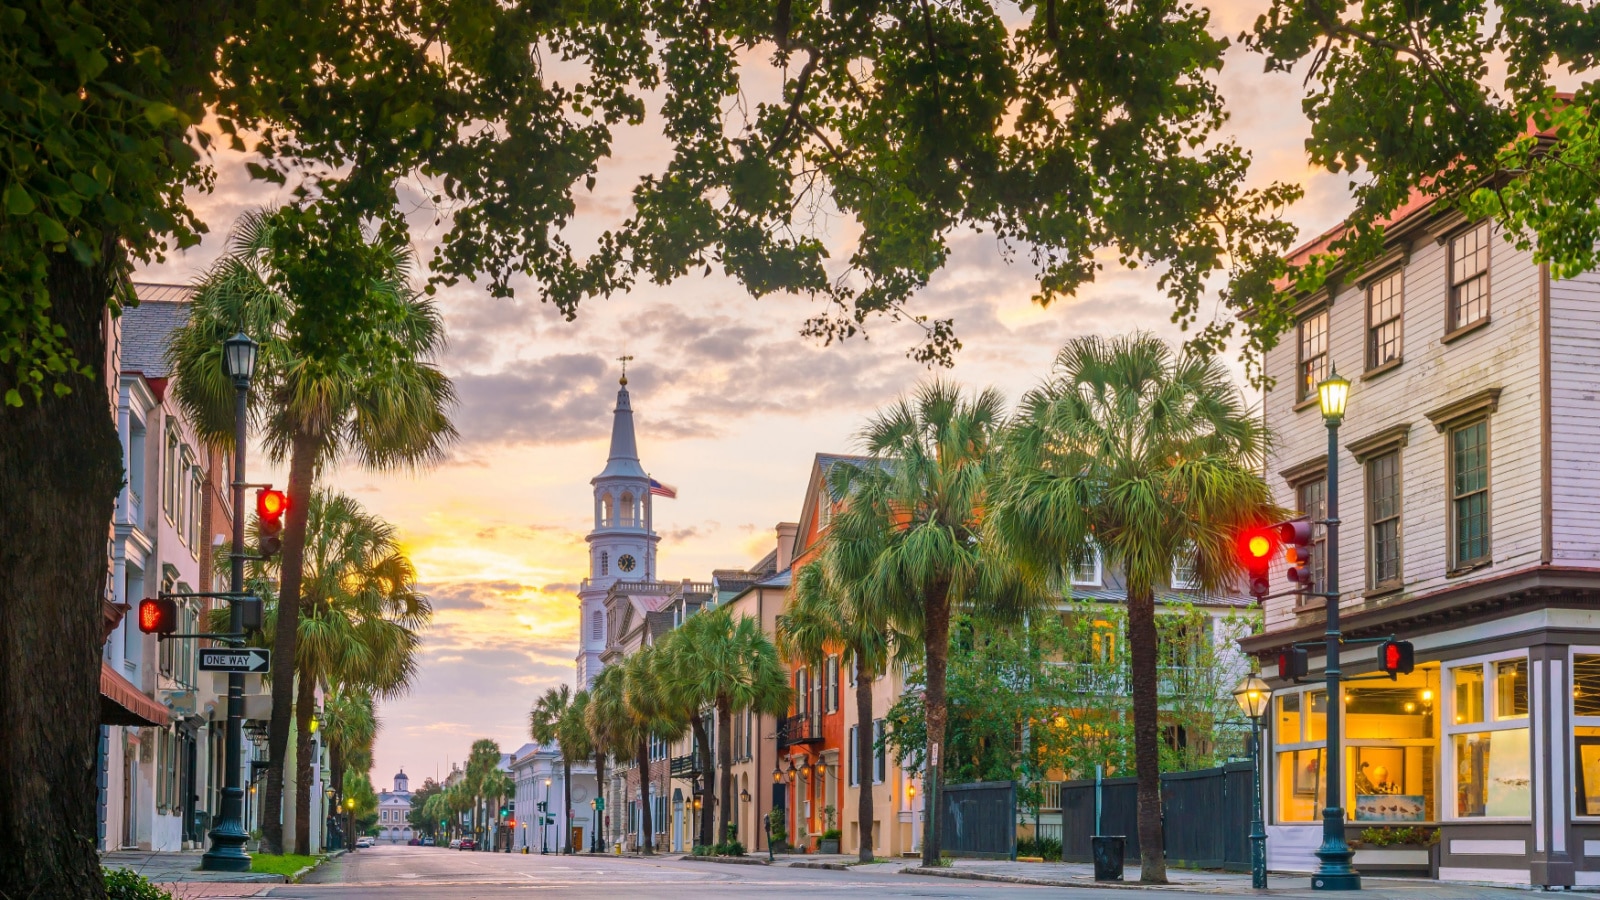 <p>With its historic district, waterfront views, and antebellum charm, Charleston is one of the South’s most beautiful cities.</p>